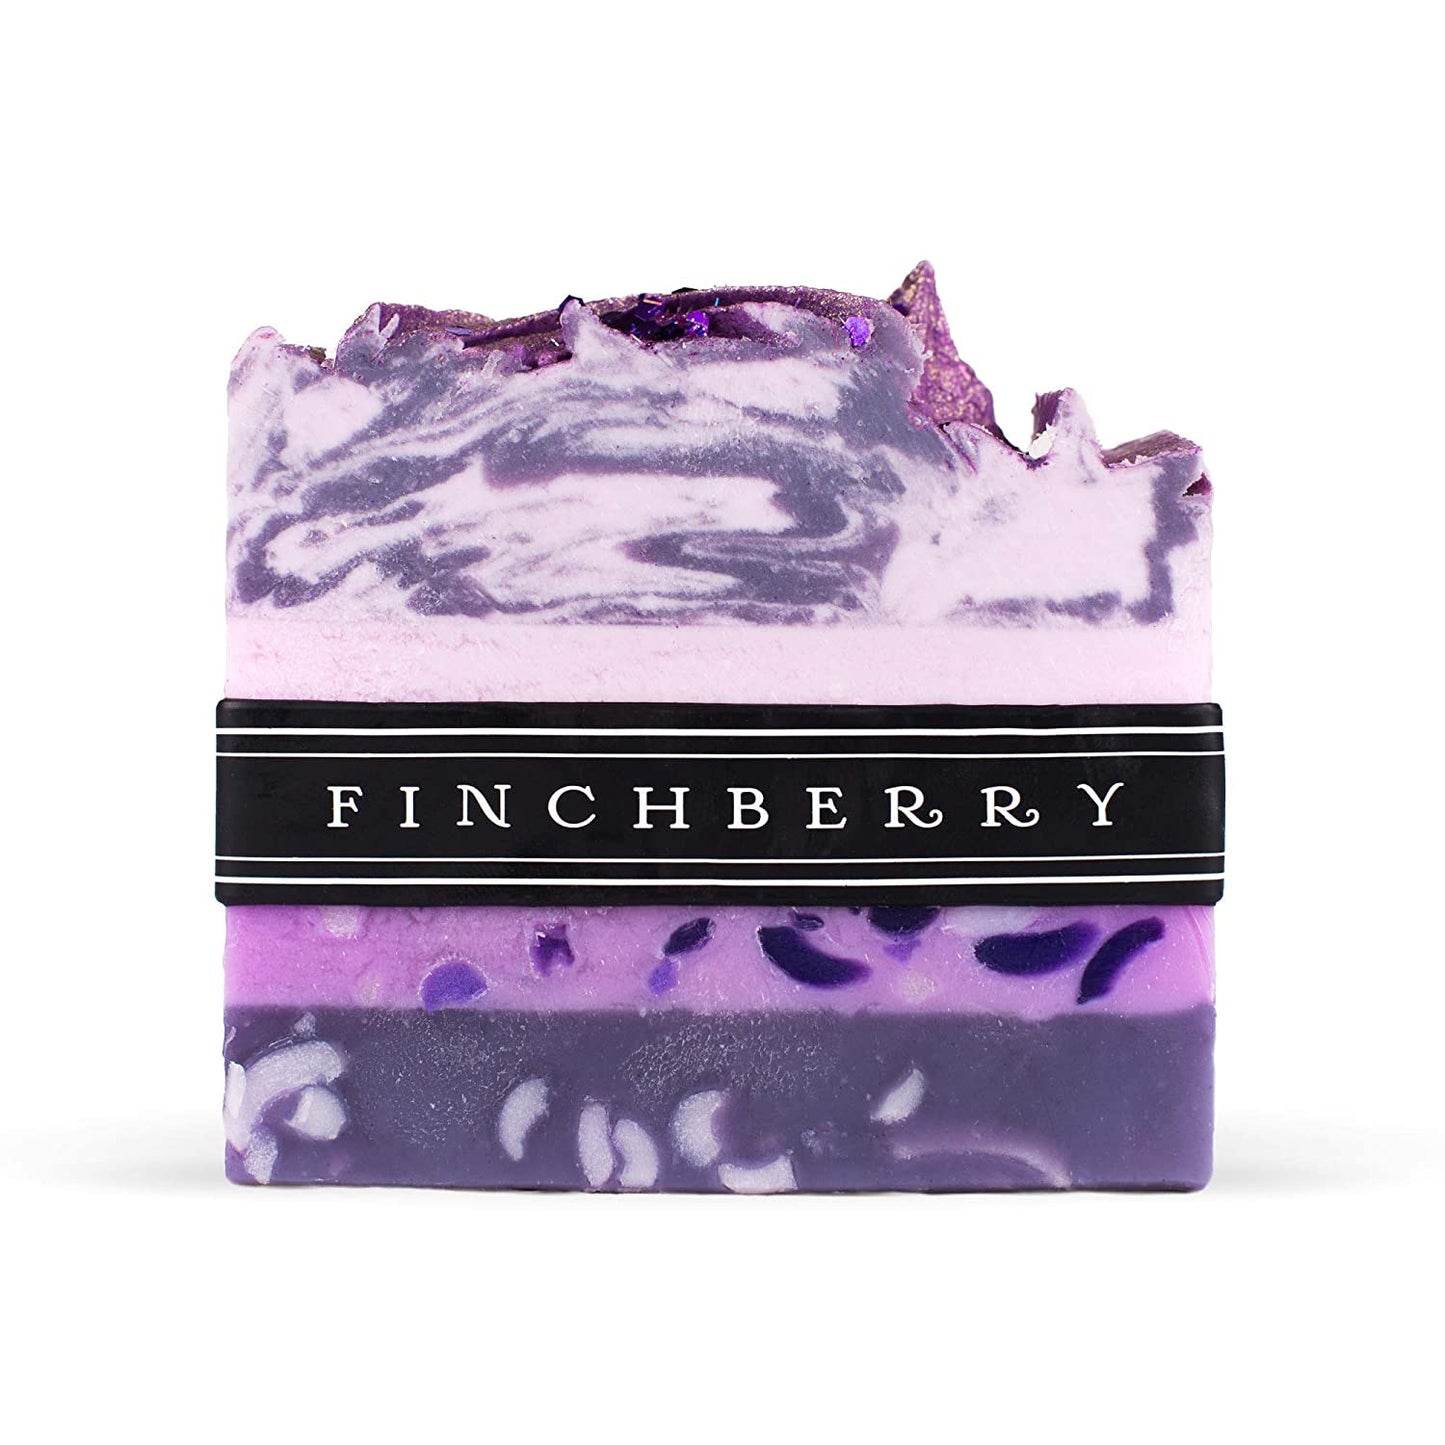 Grapes Of Bath Soap Bar - FinchBerry